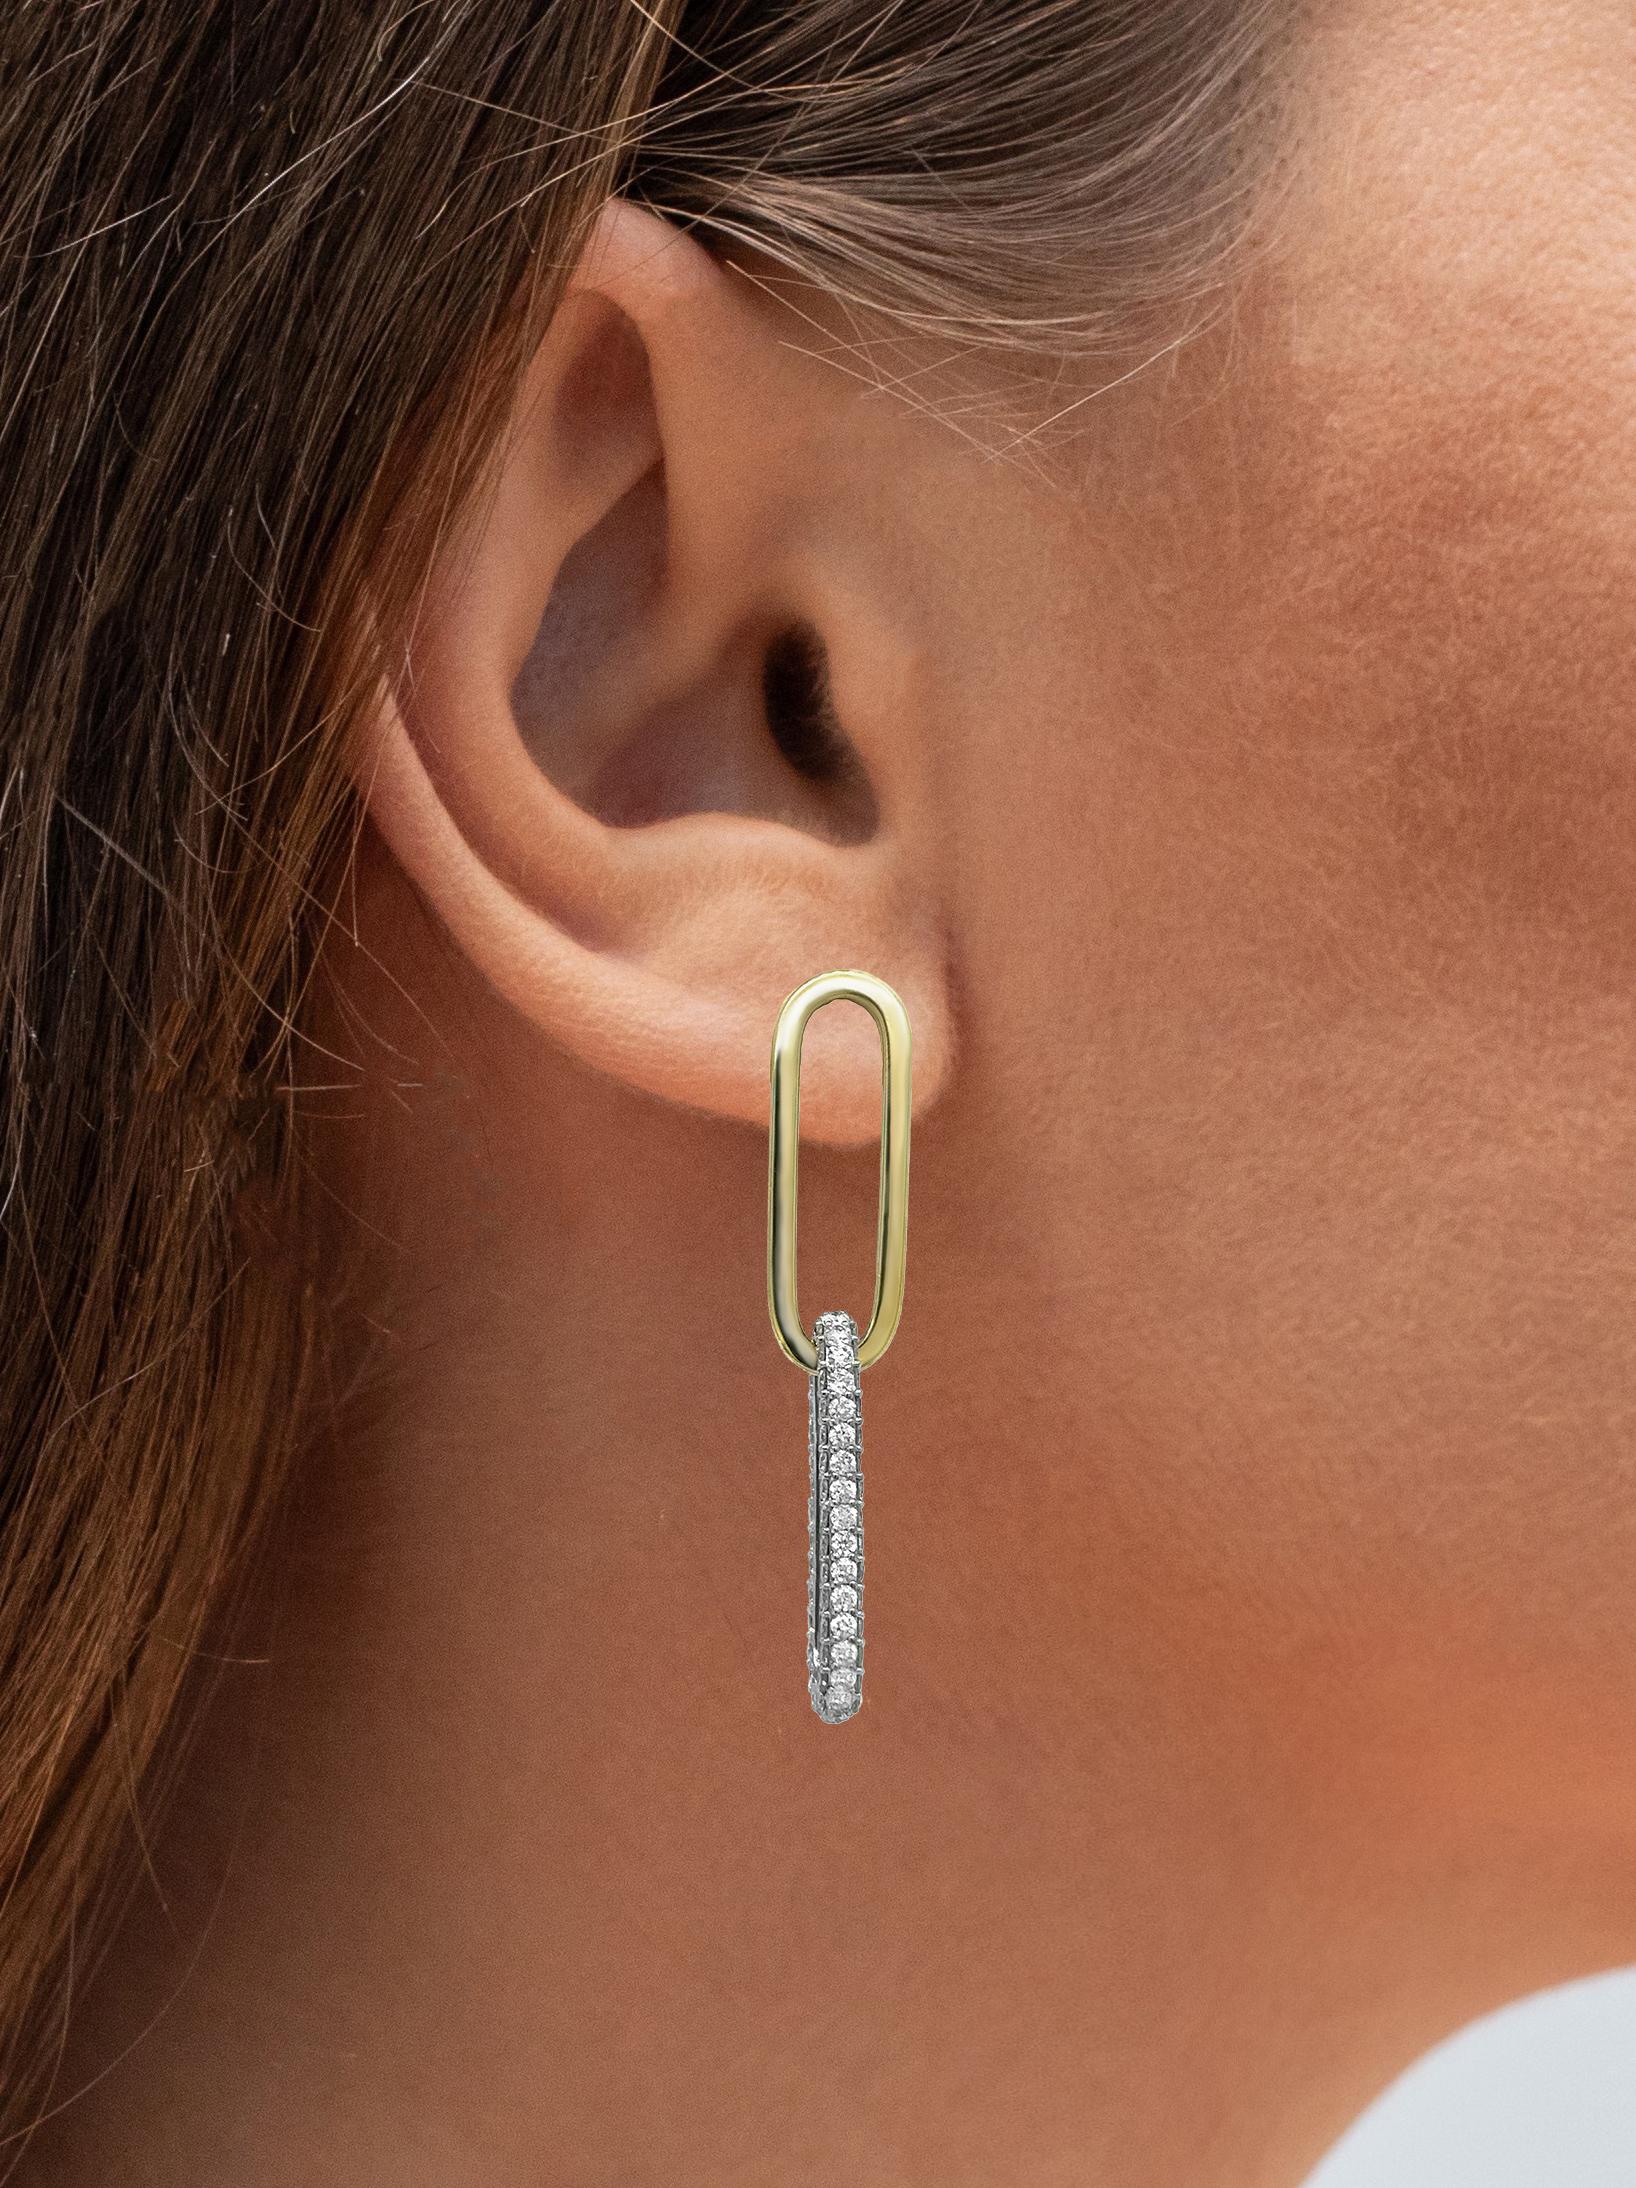 Contemporary Diamond Paperclip Earrings 2.91 Carats 14K Gold For Sale